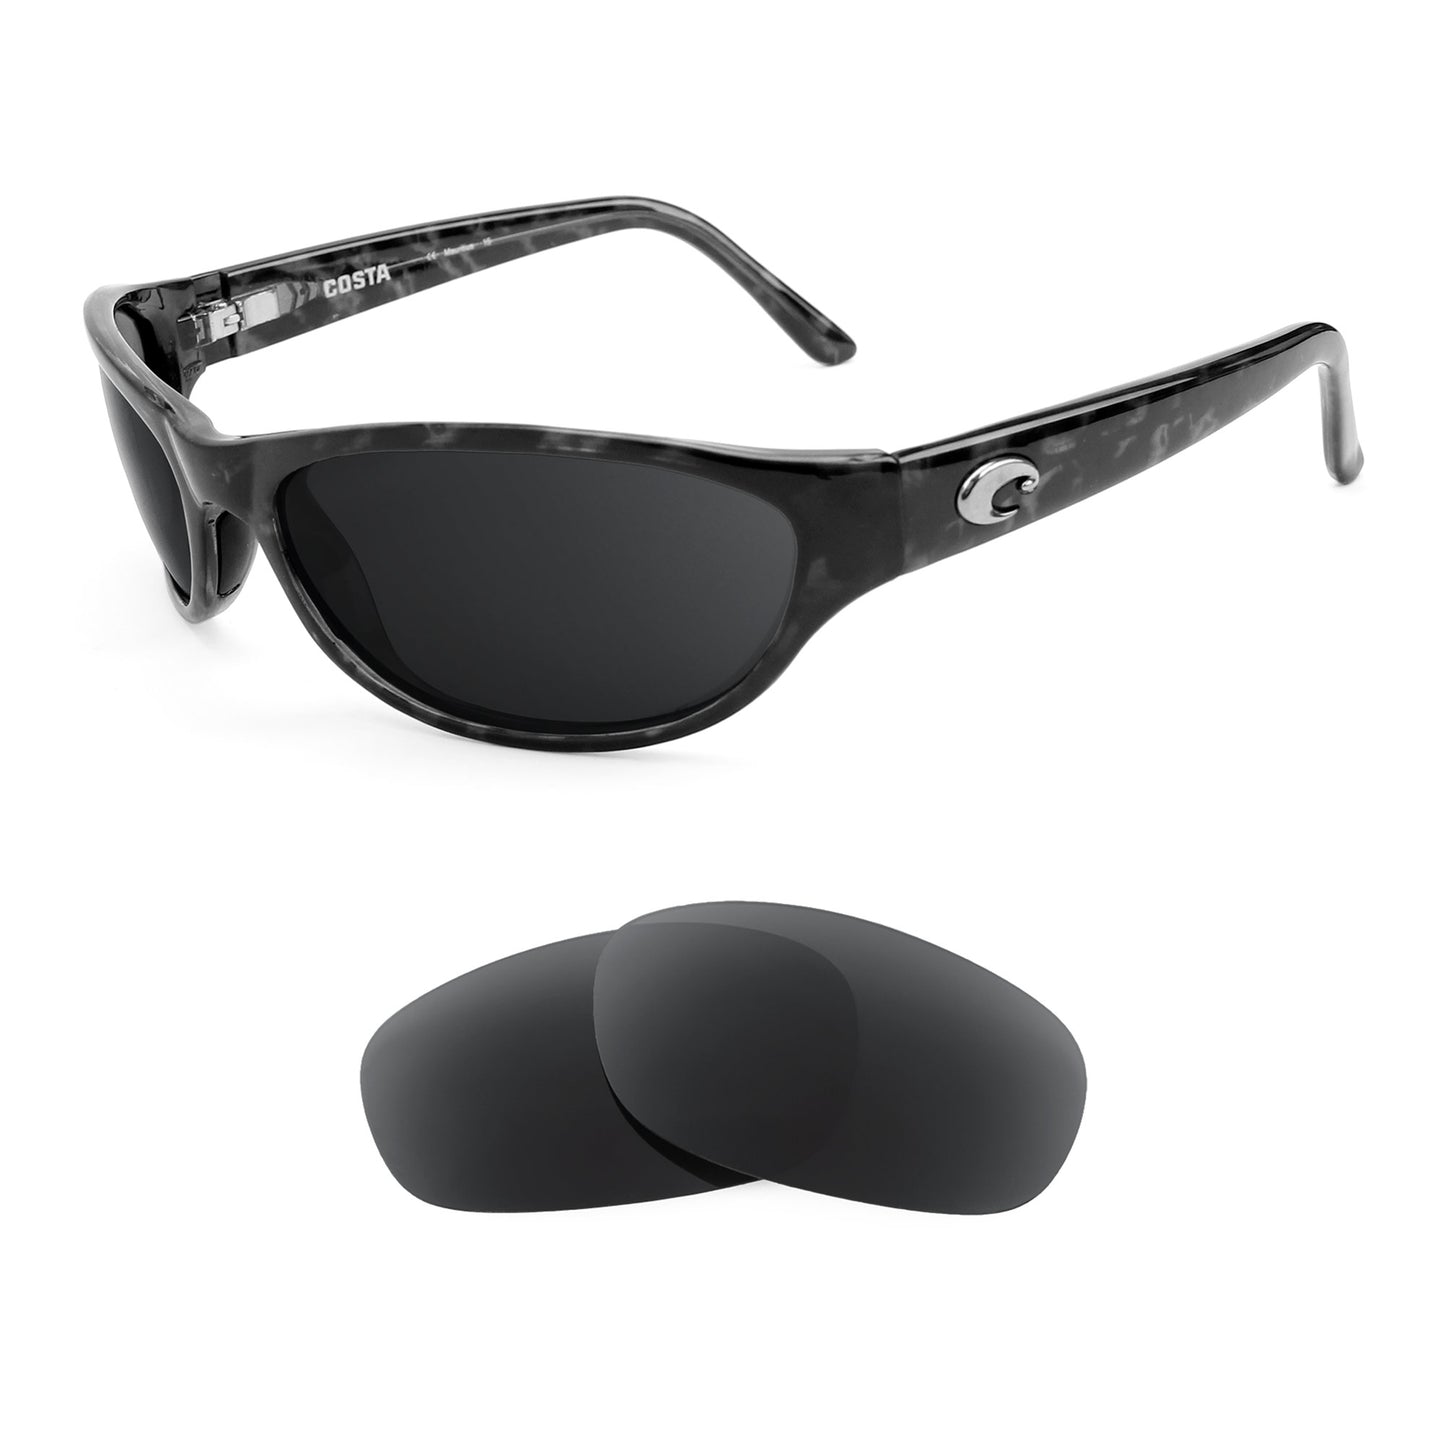 Costa Triple Tail sunglasses with replacement lenses